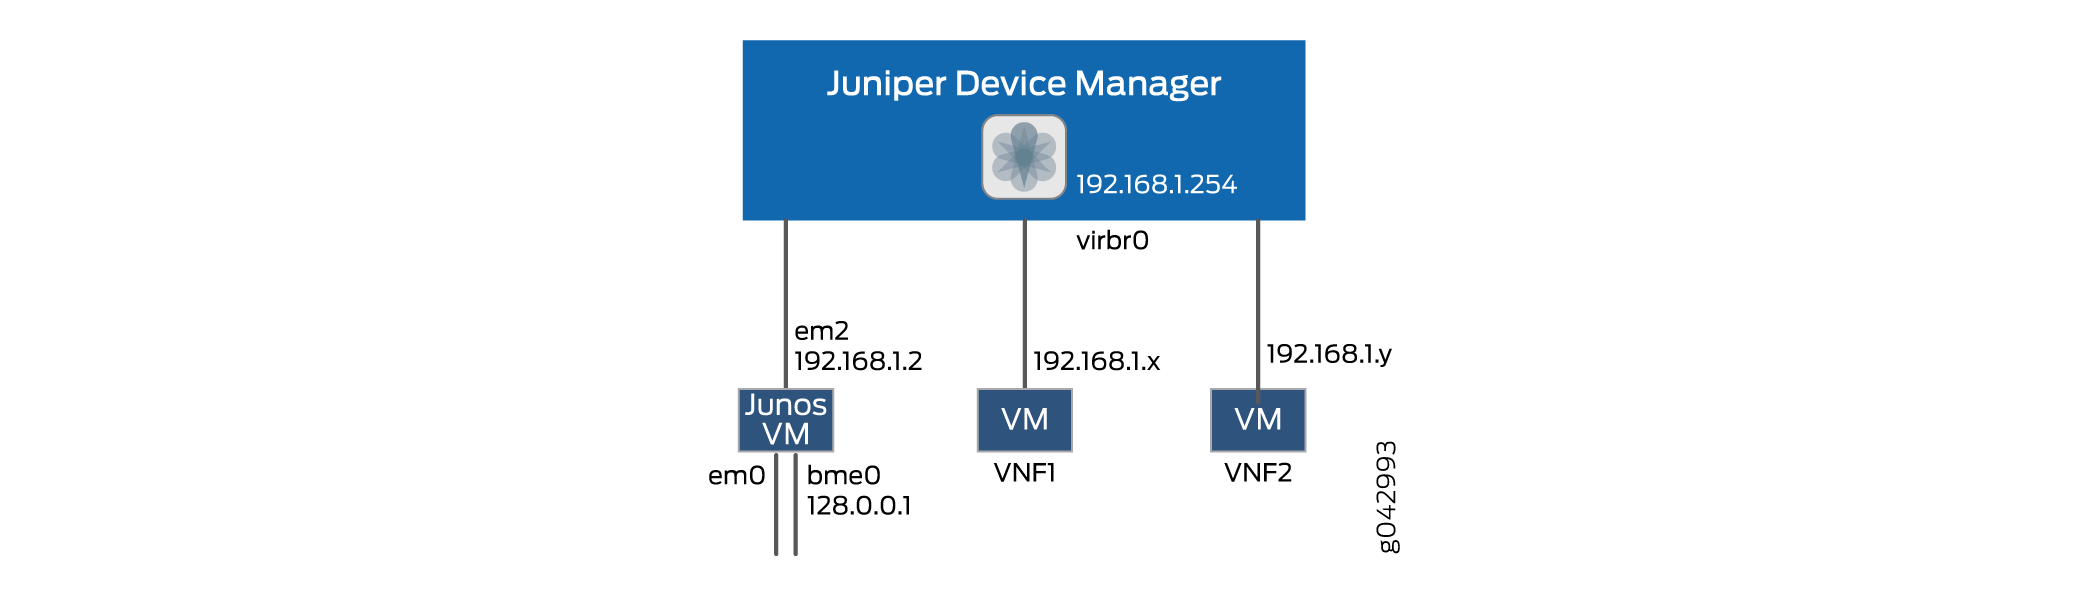 Network Connections Between JDM and the VMs